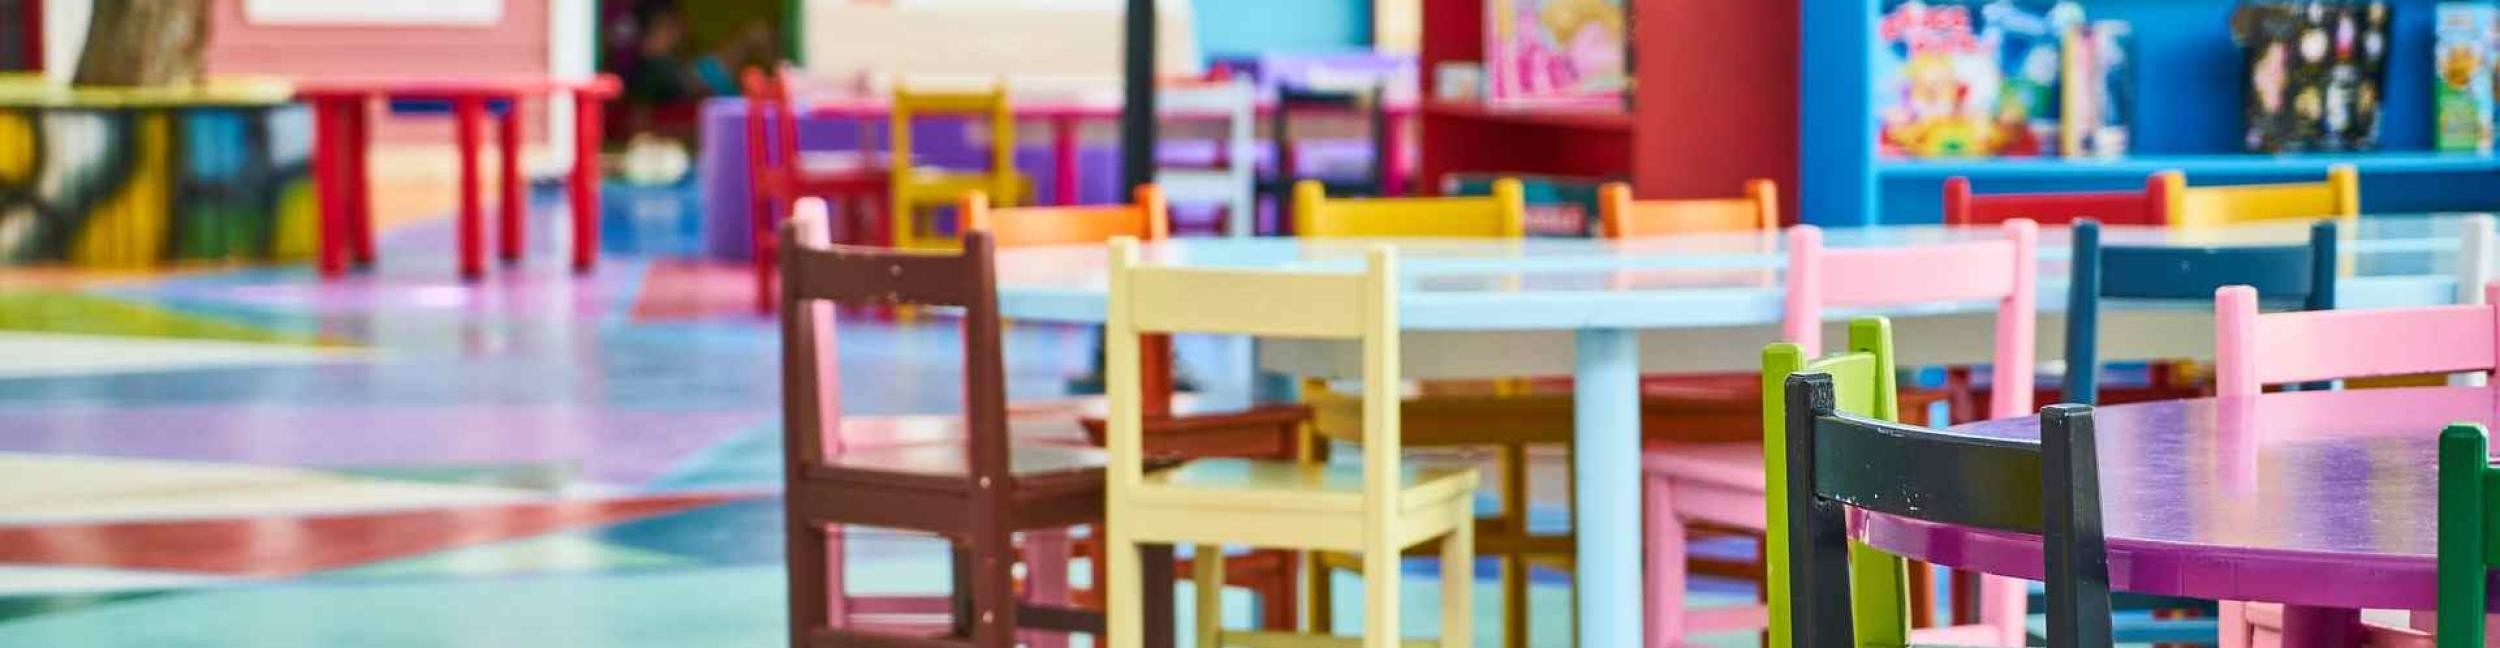 Children's tables and chairs in the kindergarten